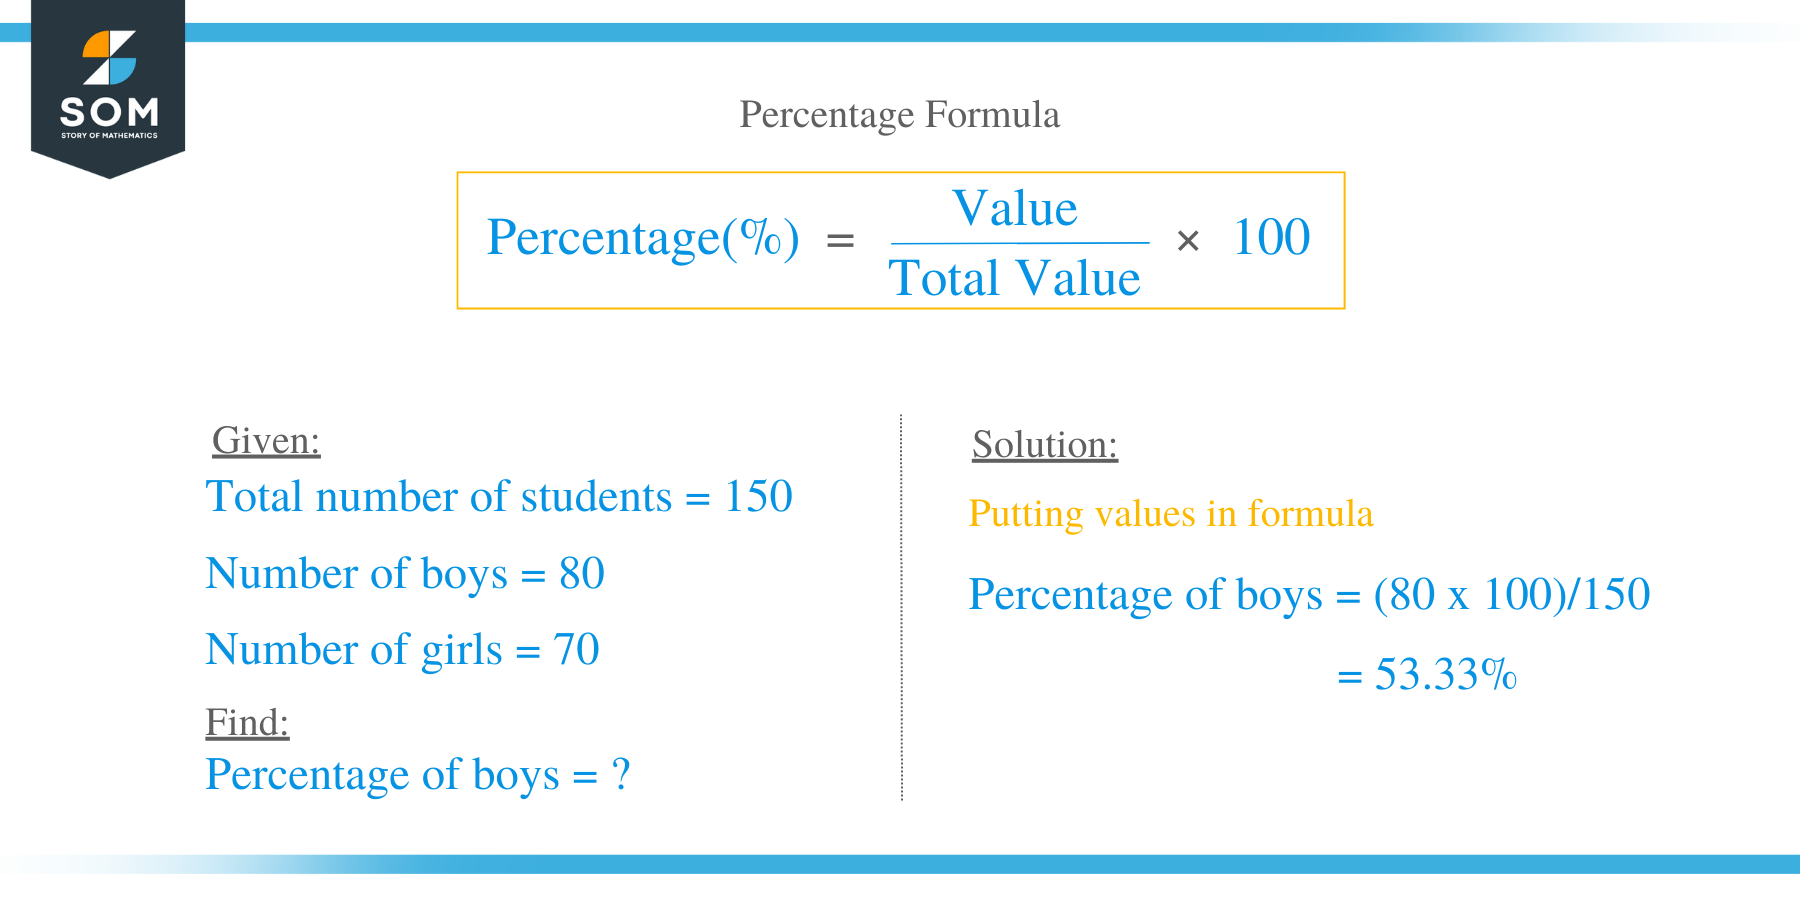 How to Calculate Percentage?